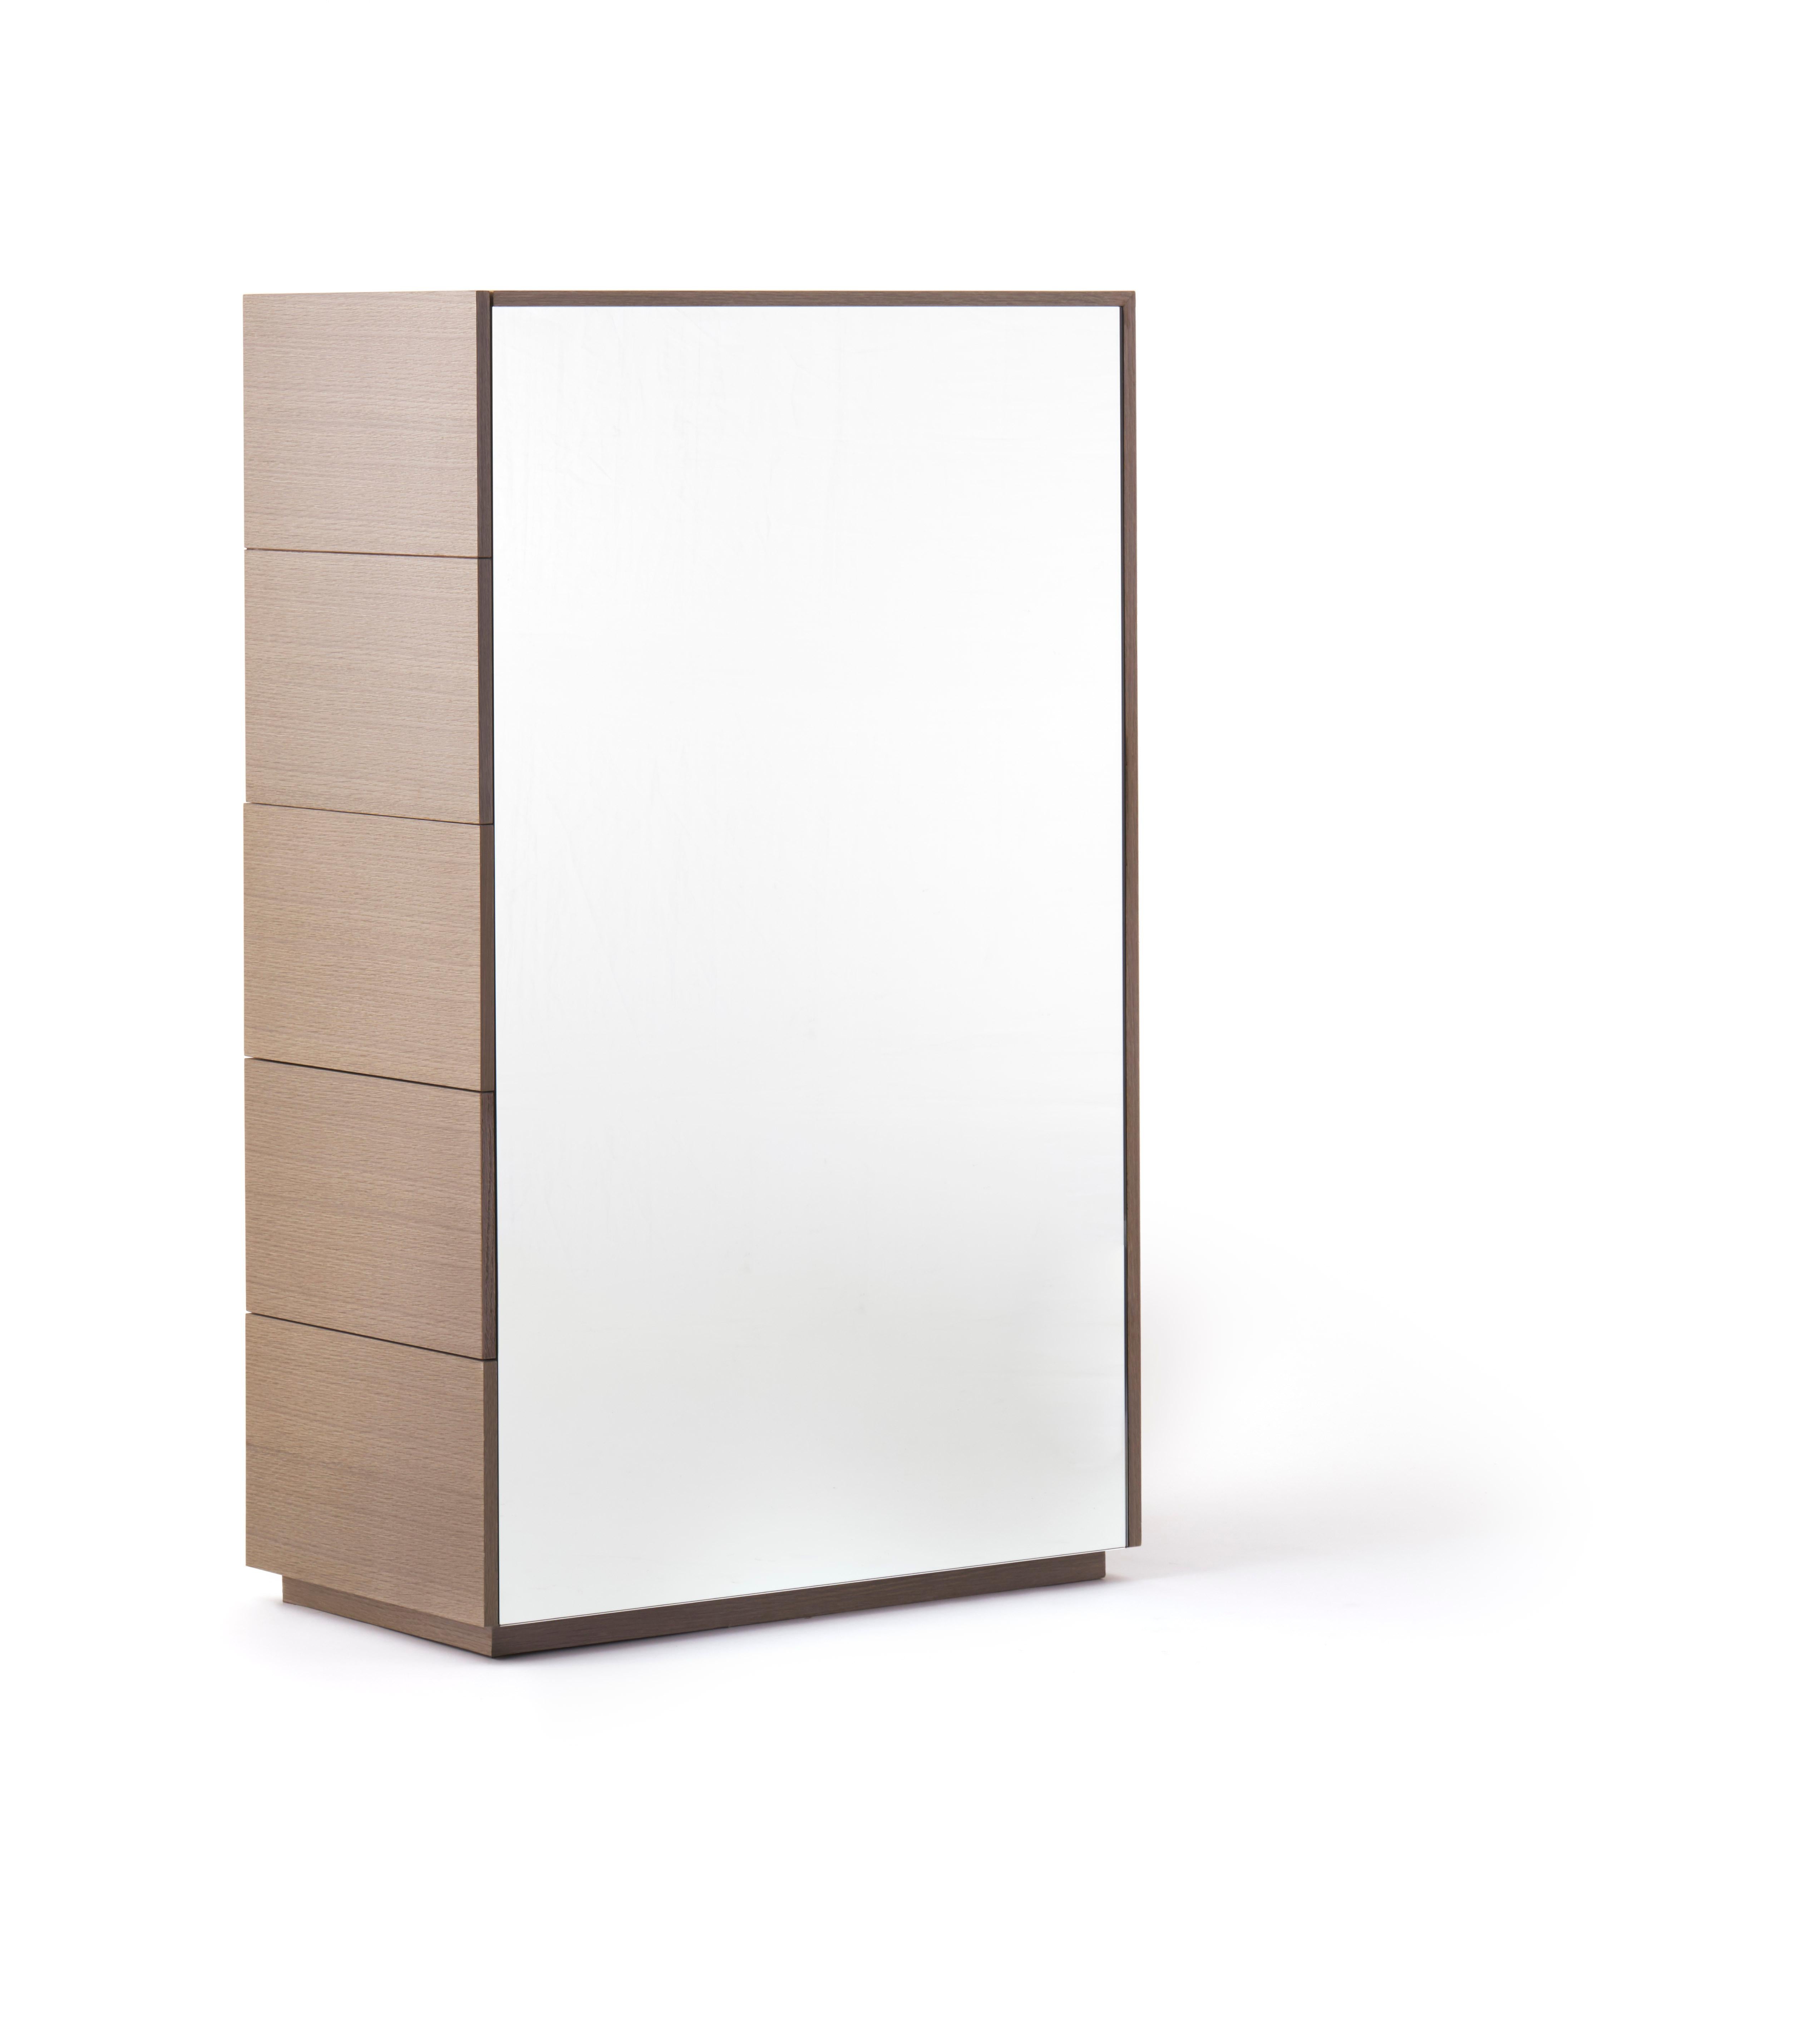 Vietnamese Mirrored Cabinet, with a Desk Option For Sale